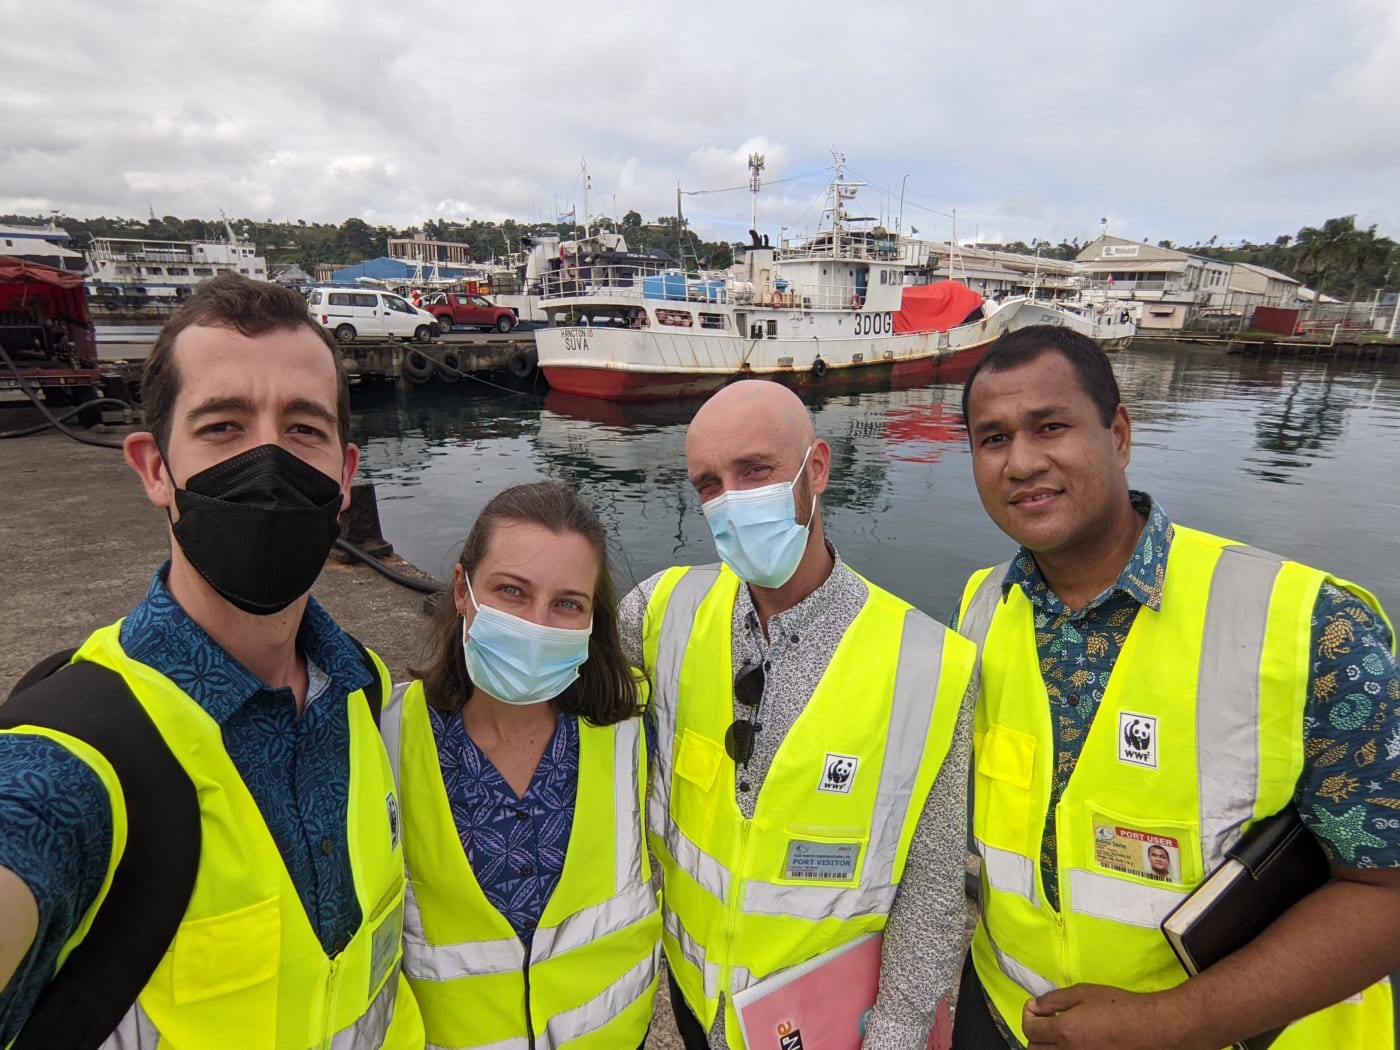 OpenSC and WWF Pacific team members at Suva port. Left to right: Tim Baker (OpenSC), Lily Lunday (OpenSC), Pierre Wittorski (OpenSC), Adriu Iene (WWF Pacific)